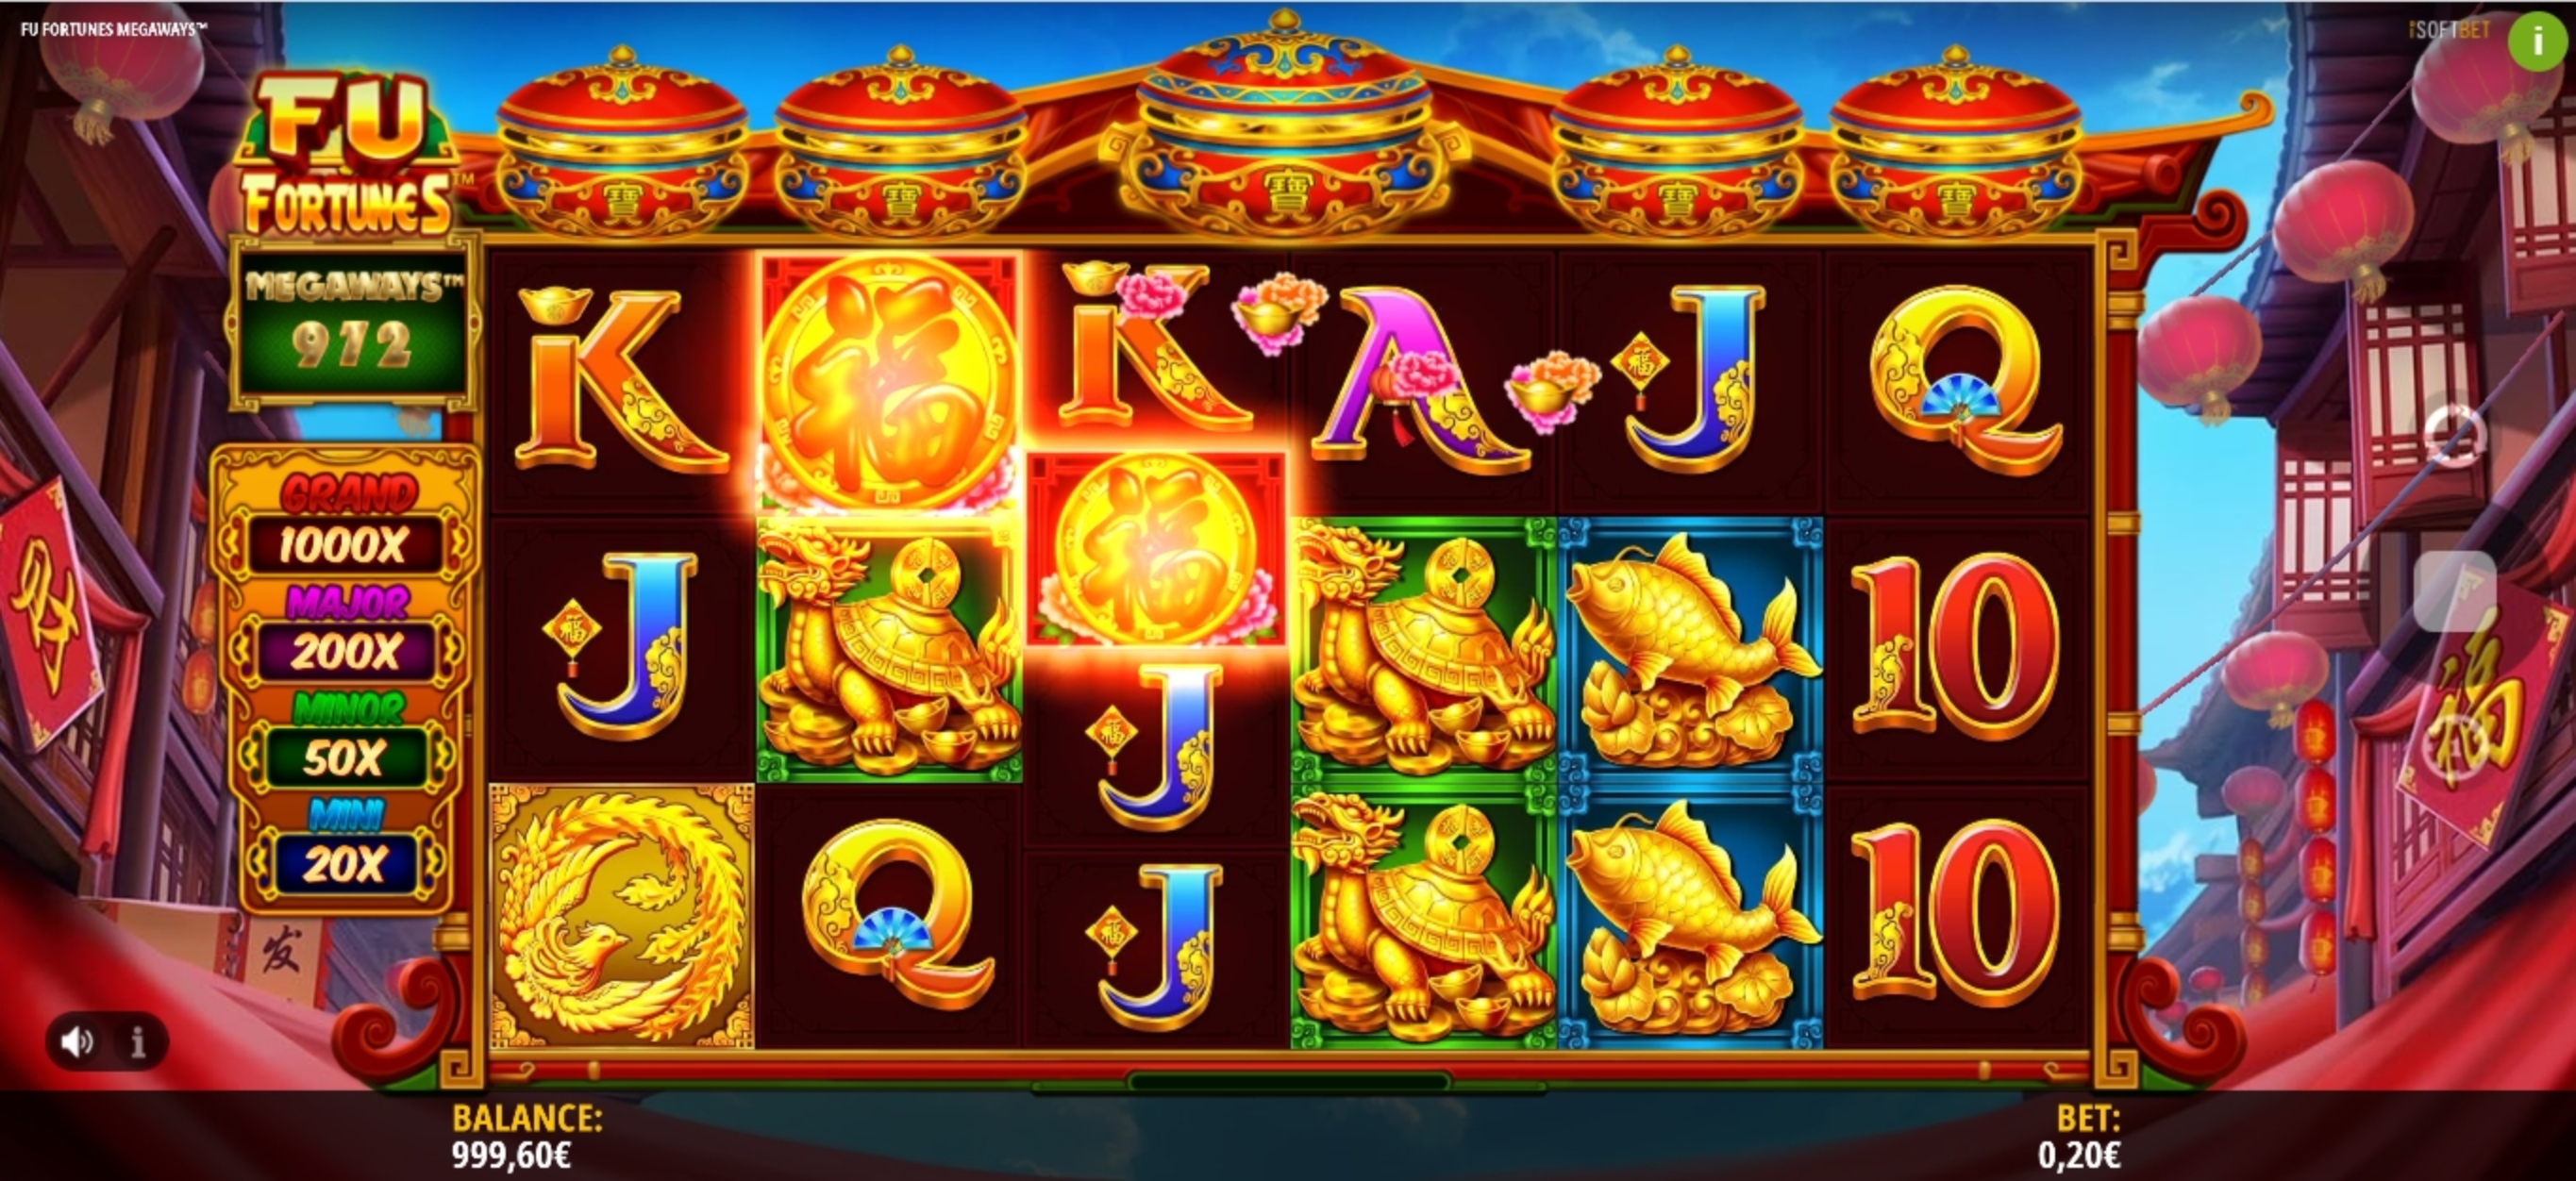 Win Money in Fu Fortunes Megaways Free Slot Game by iSoftBet